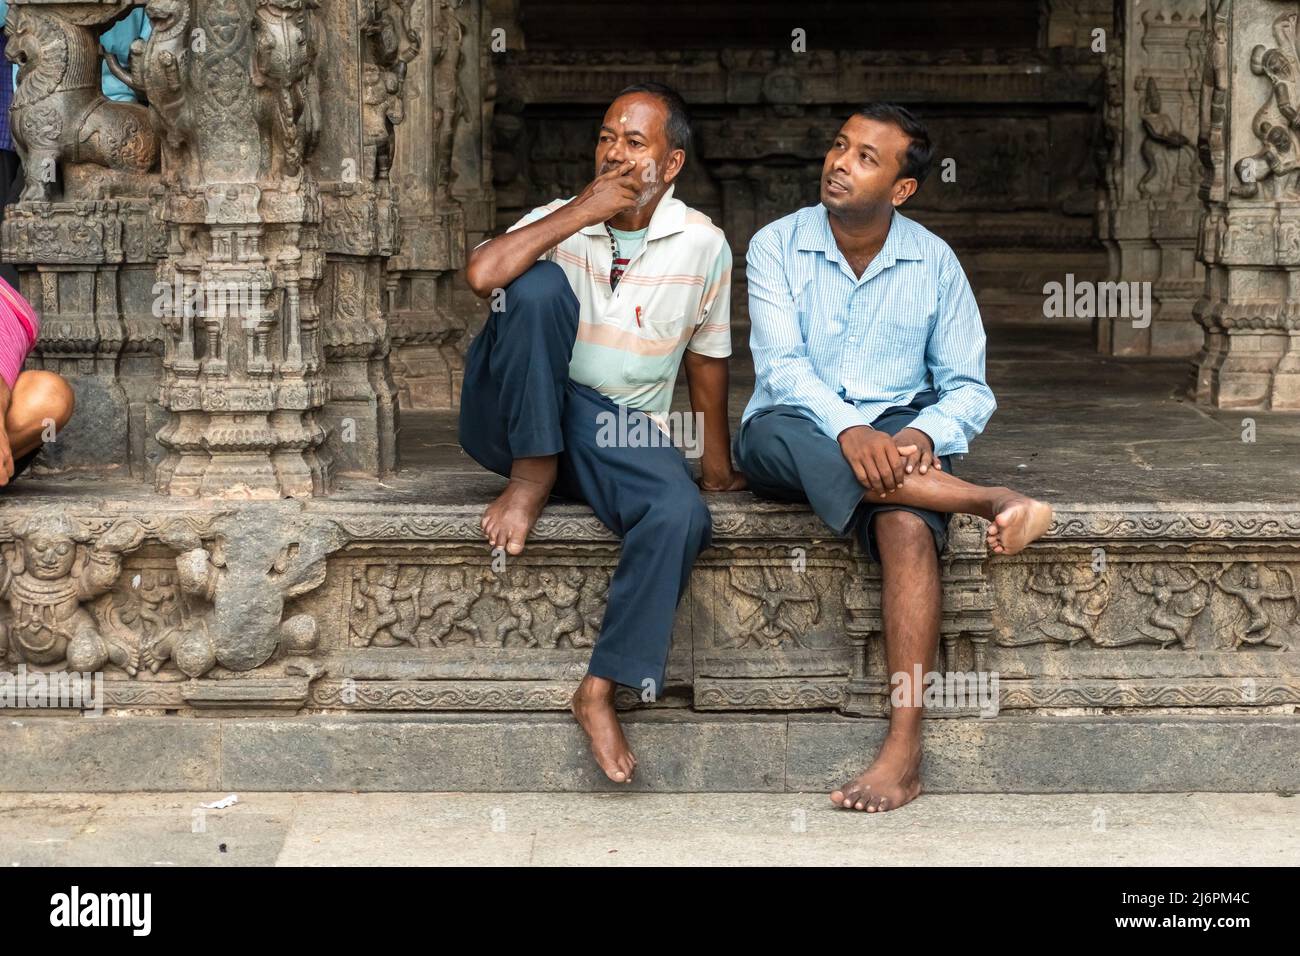 Vellore, Tamil Nadu, India - September 2018: Two Indian men sitting in the ancient Hindu temple at the Vellore Fort. Stock Photo